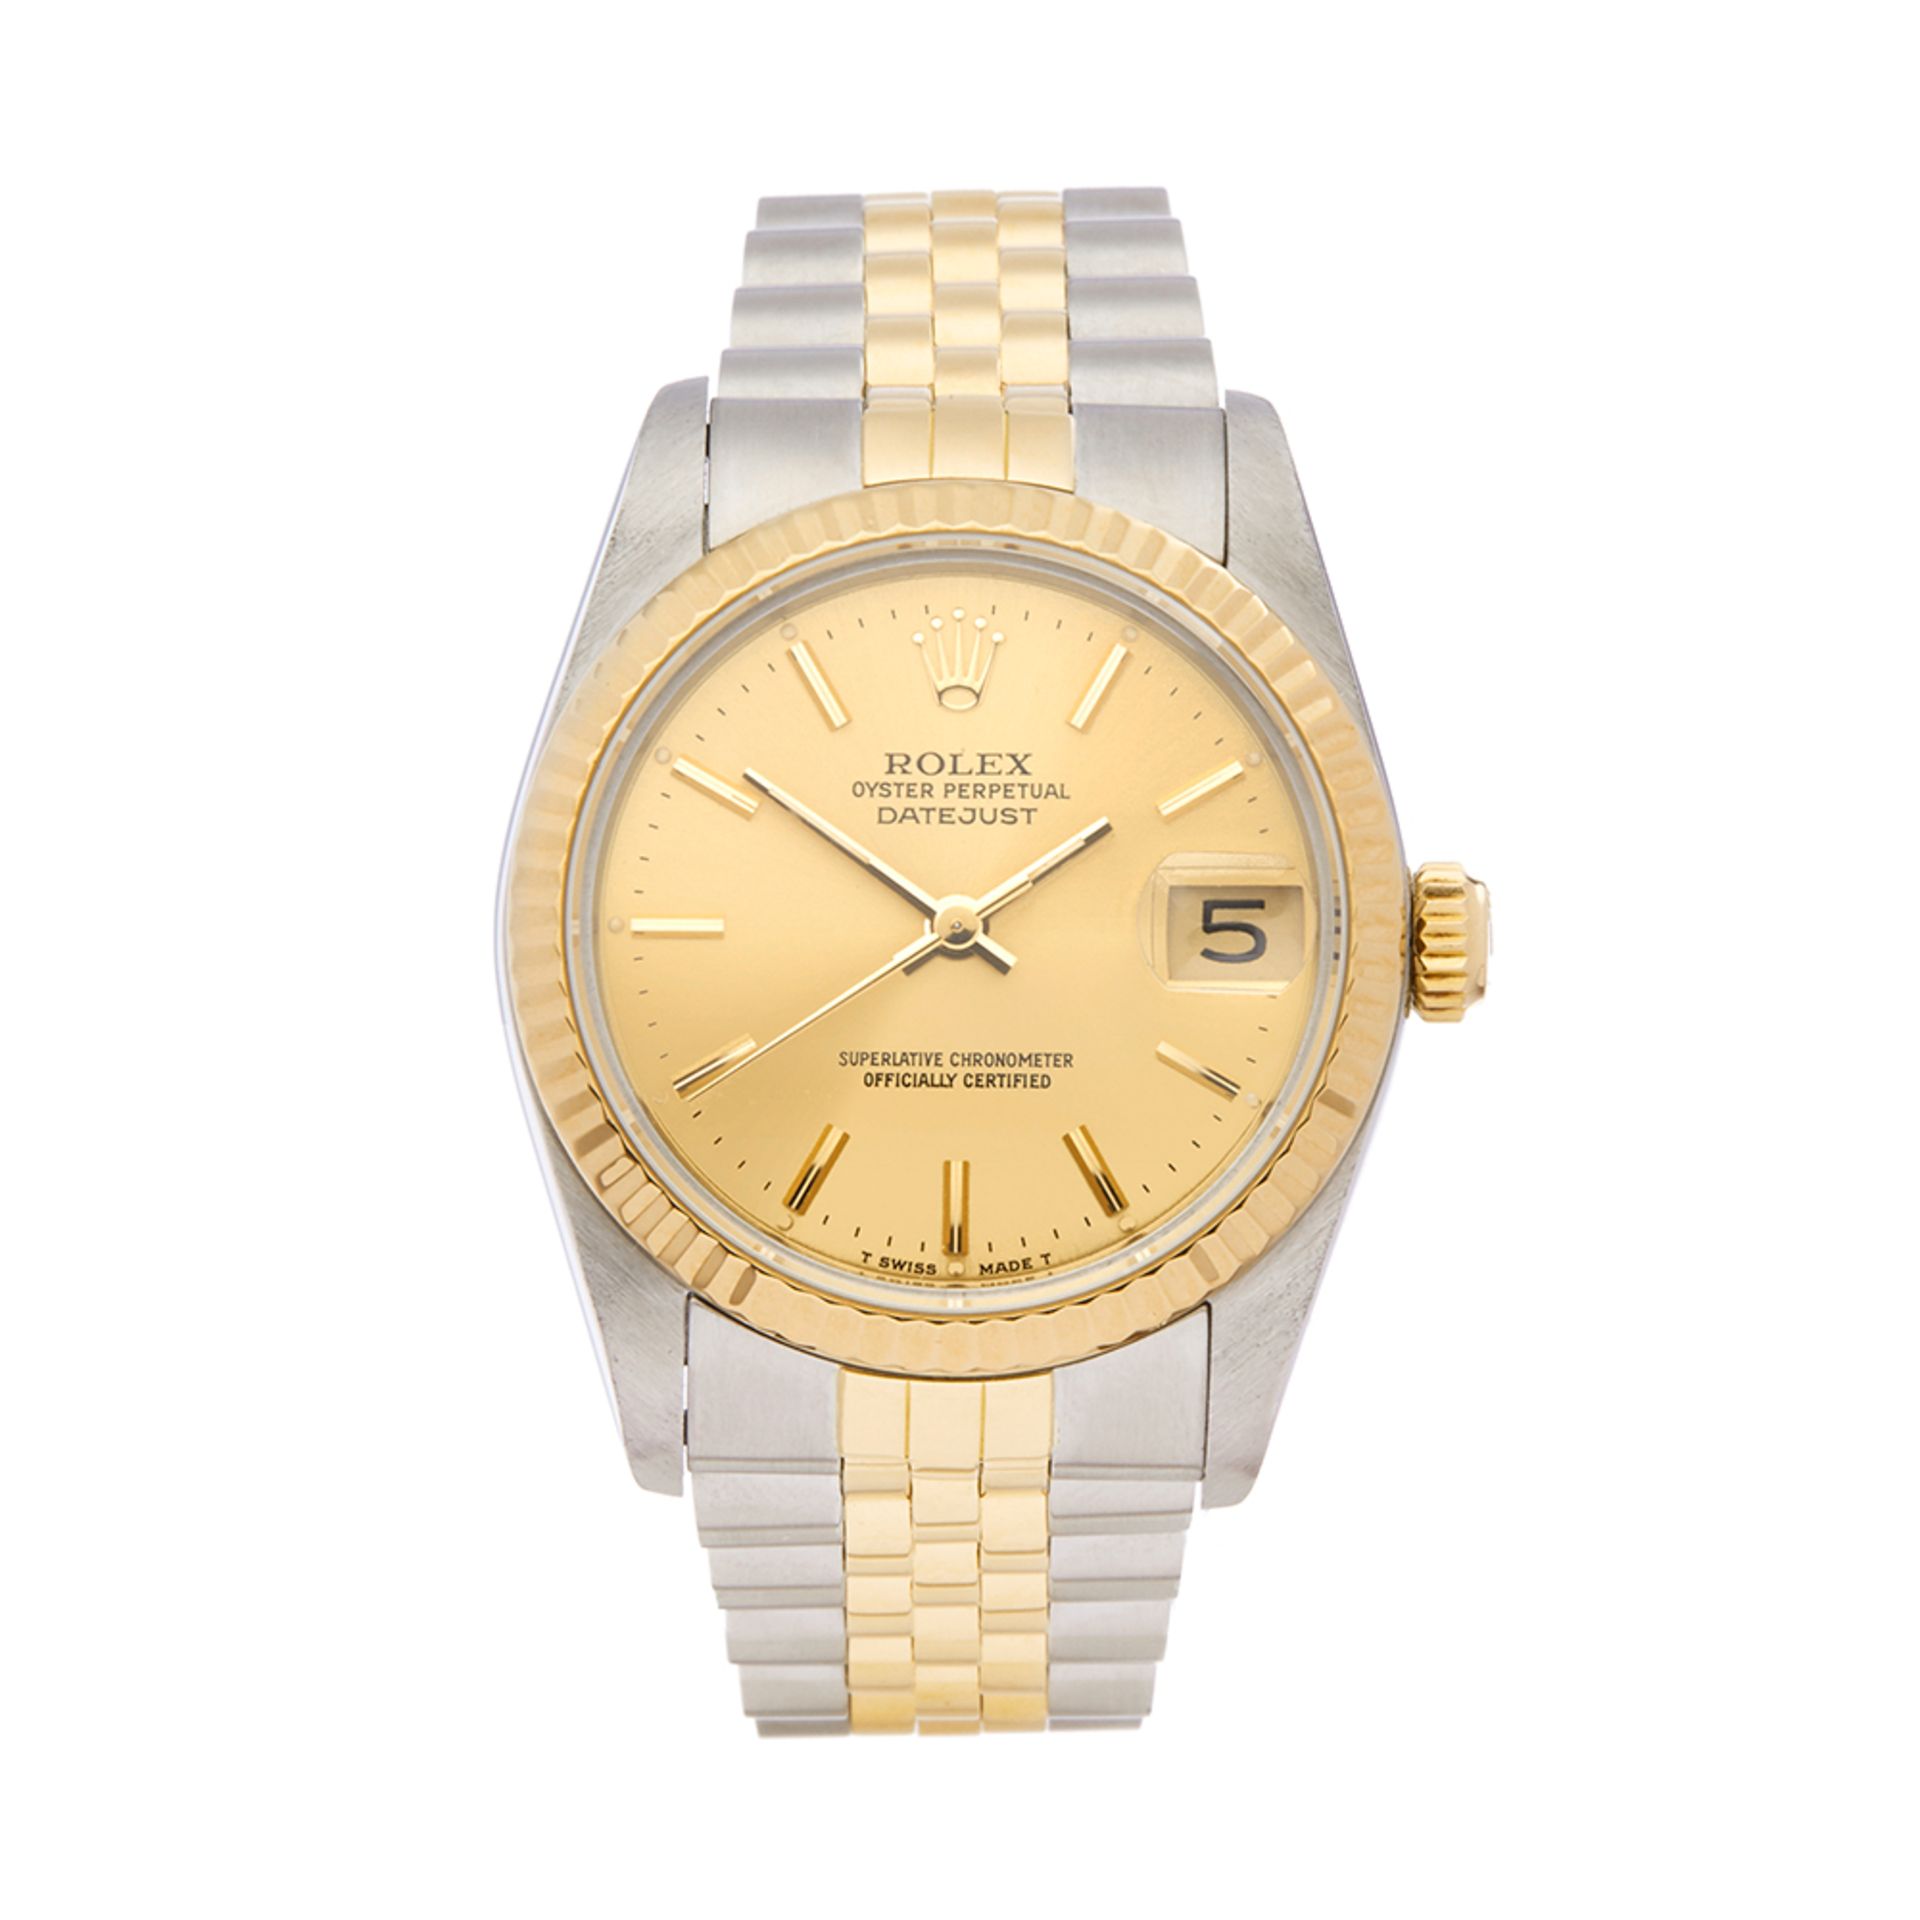 1989 Rolex DateJust 31 18k Stainless Steel & Yellow Gold - 68273 - Image 9 of 9